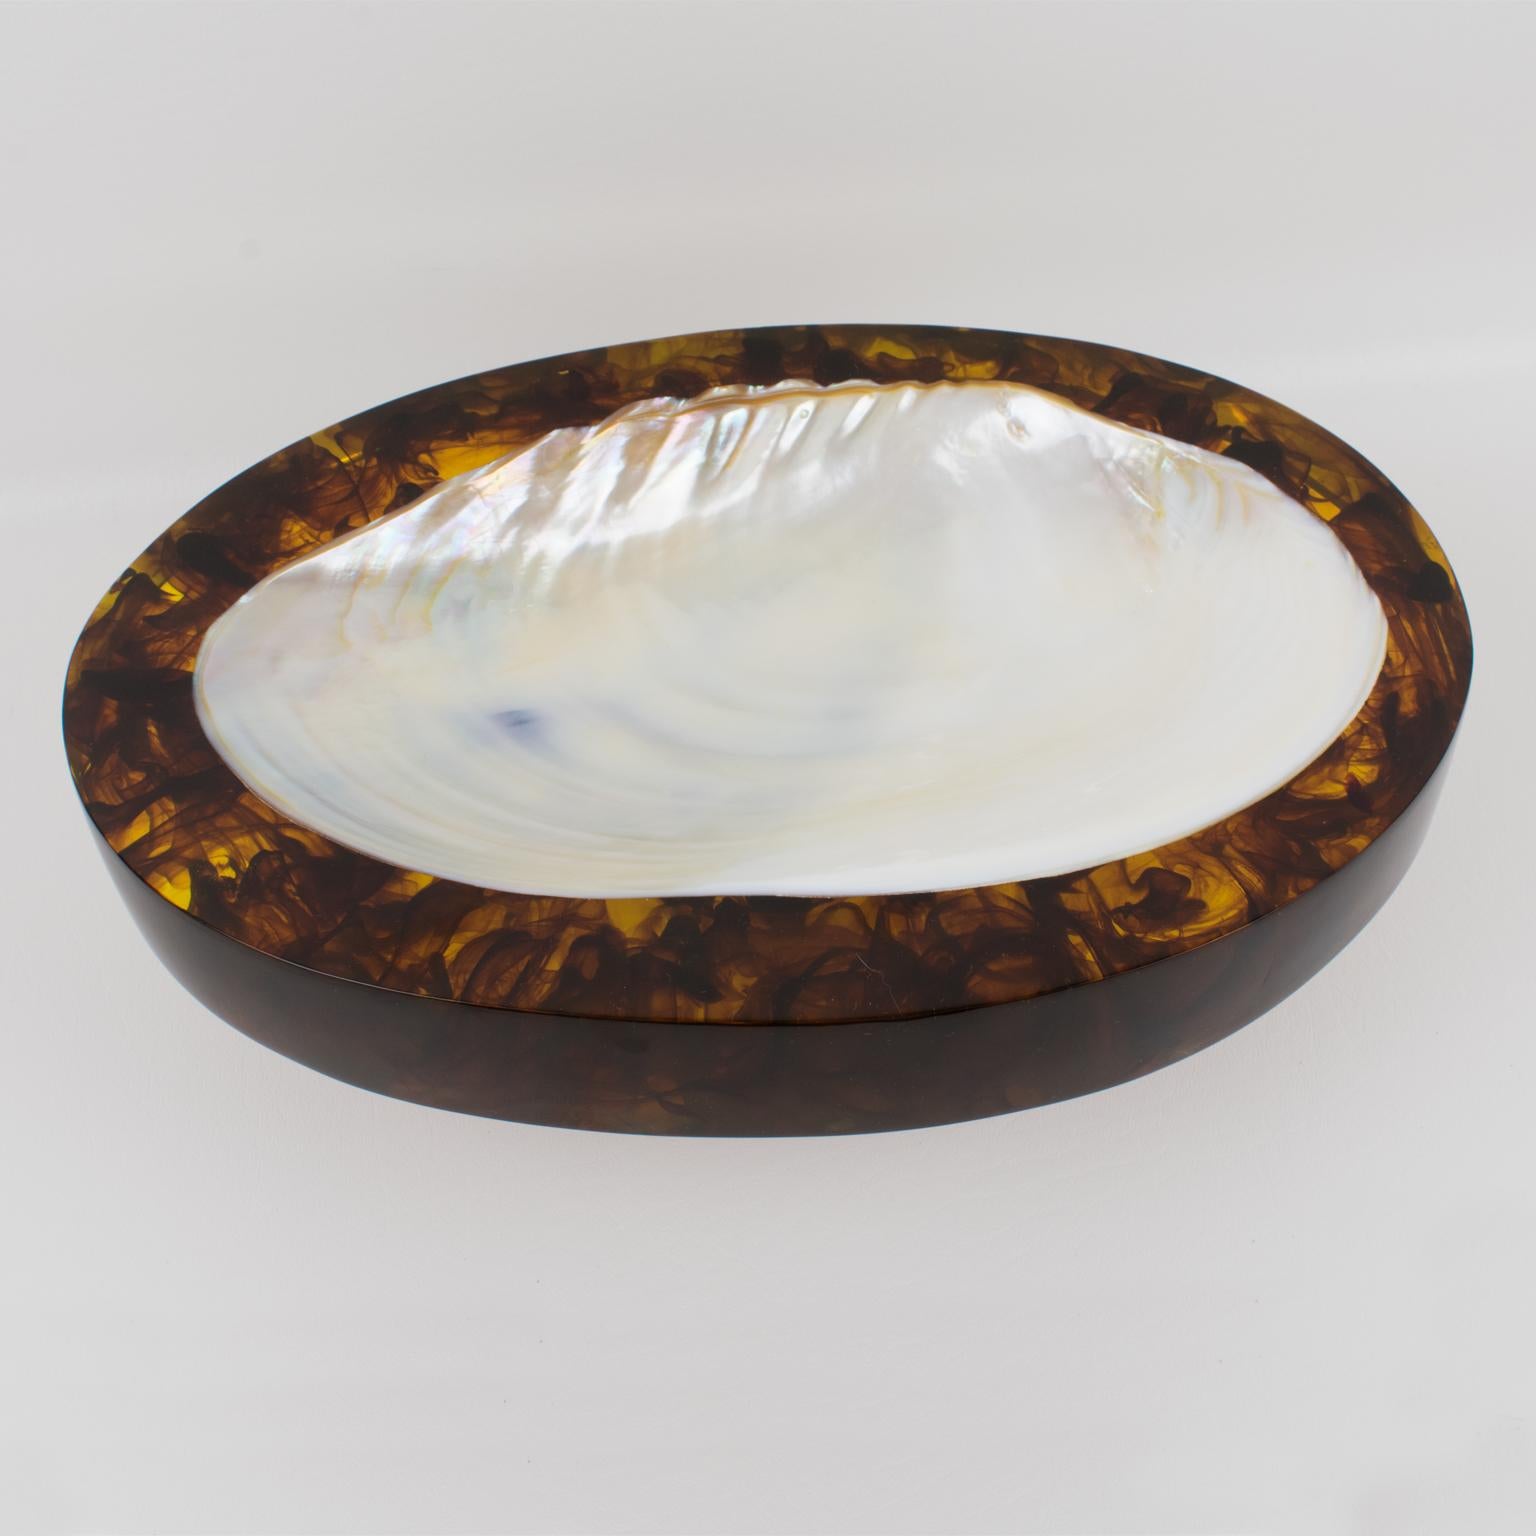 This stunning 1980s French modern desk tidy, vide poche, or catchall features an oval shape with an extra thick resin slab in a gorgeous rootbeer swirl color with a large seashell insert. There is no visible maker's mark.
The vide poche is in